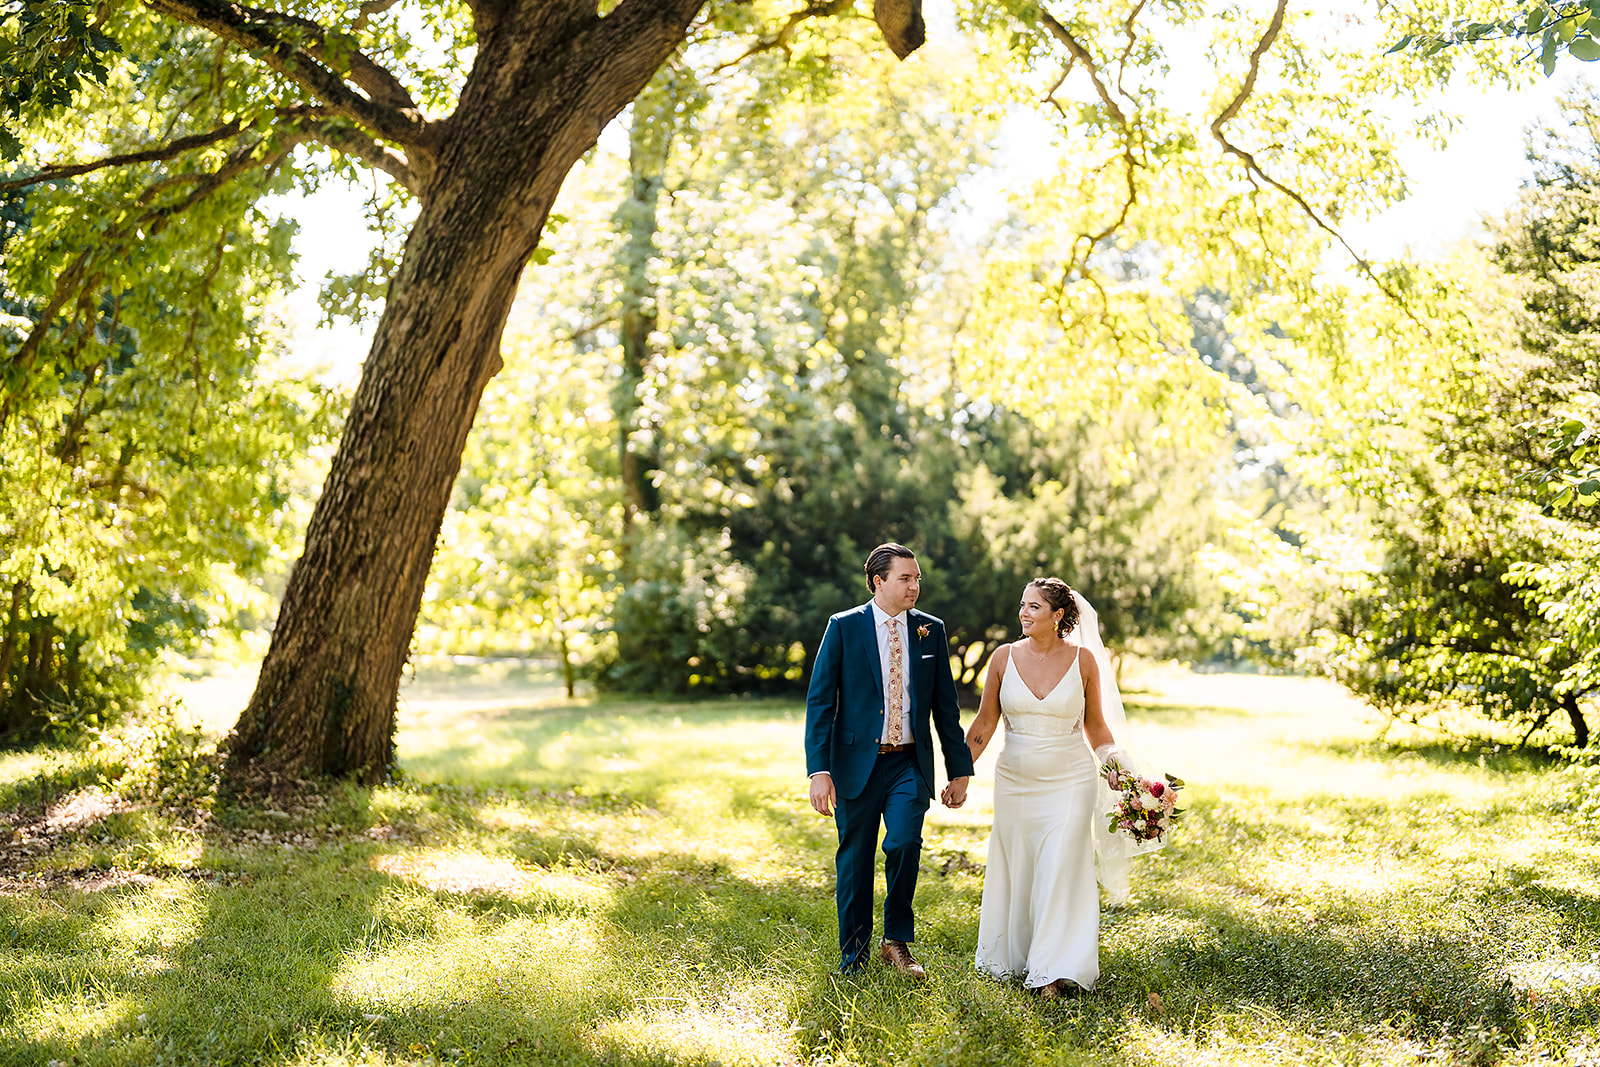 Bride and groom portrait on the wooded grounds of Awbury Arboretum in Philadelphia PA